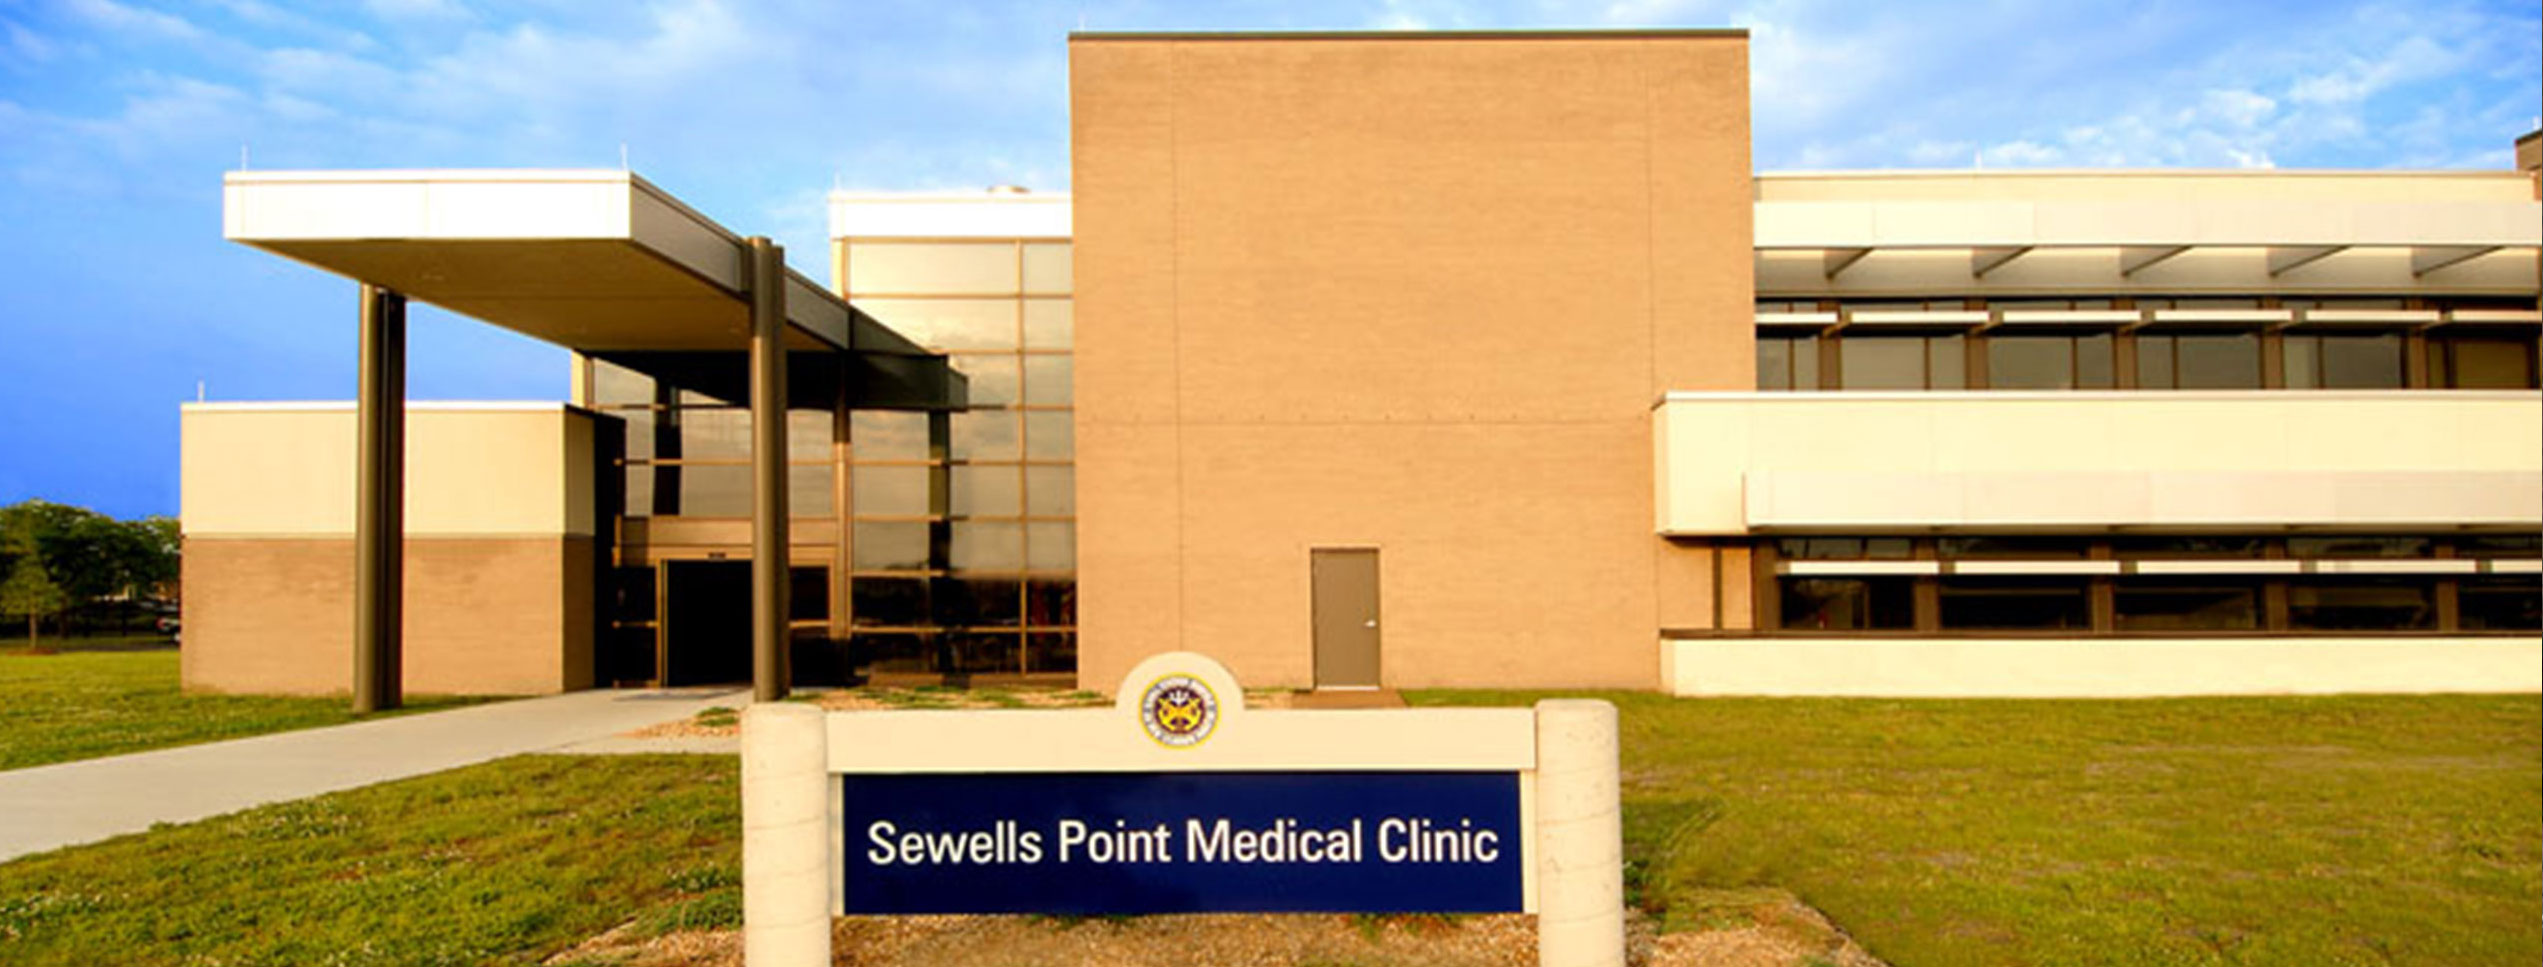 NS Norfolk Sewells Point Medical Clinic